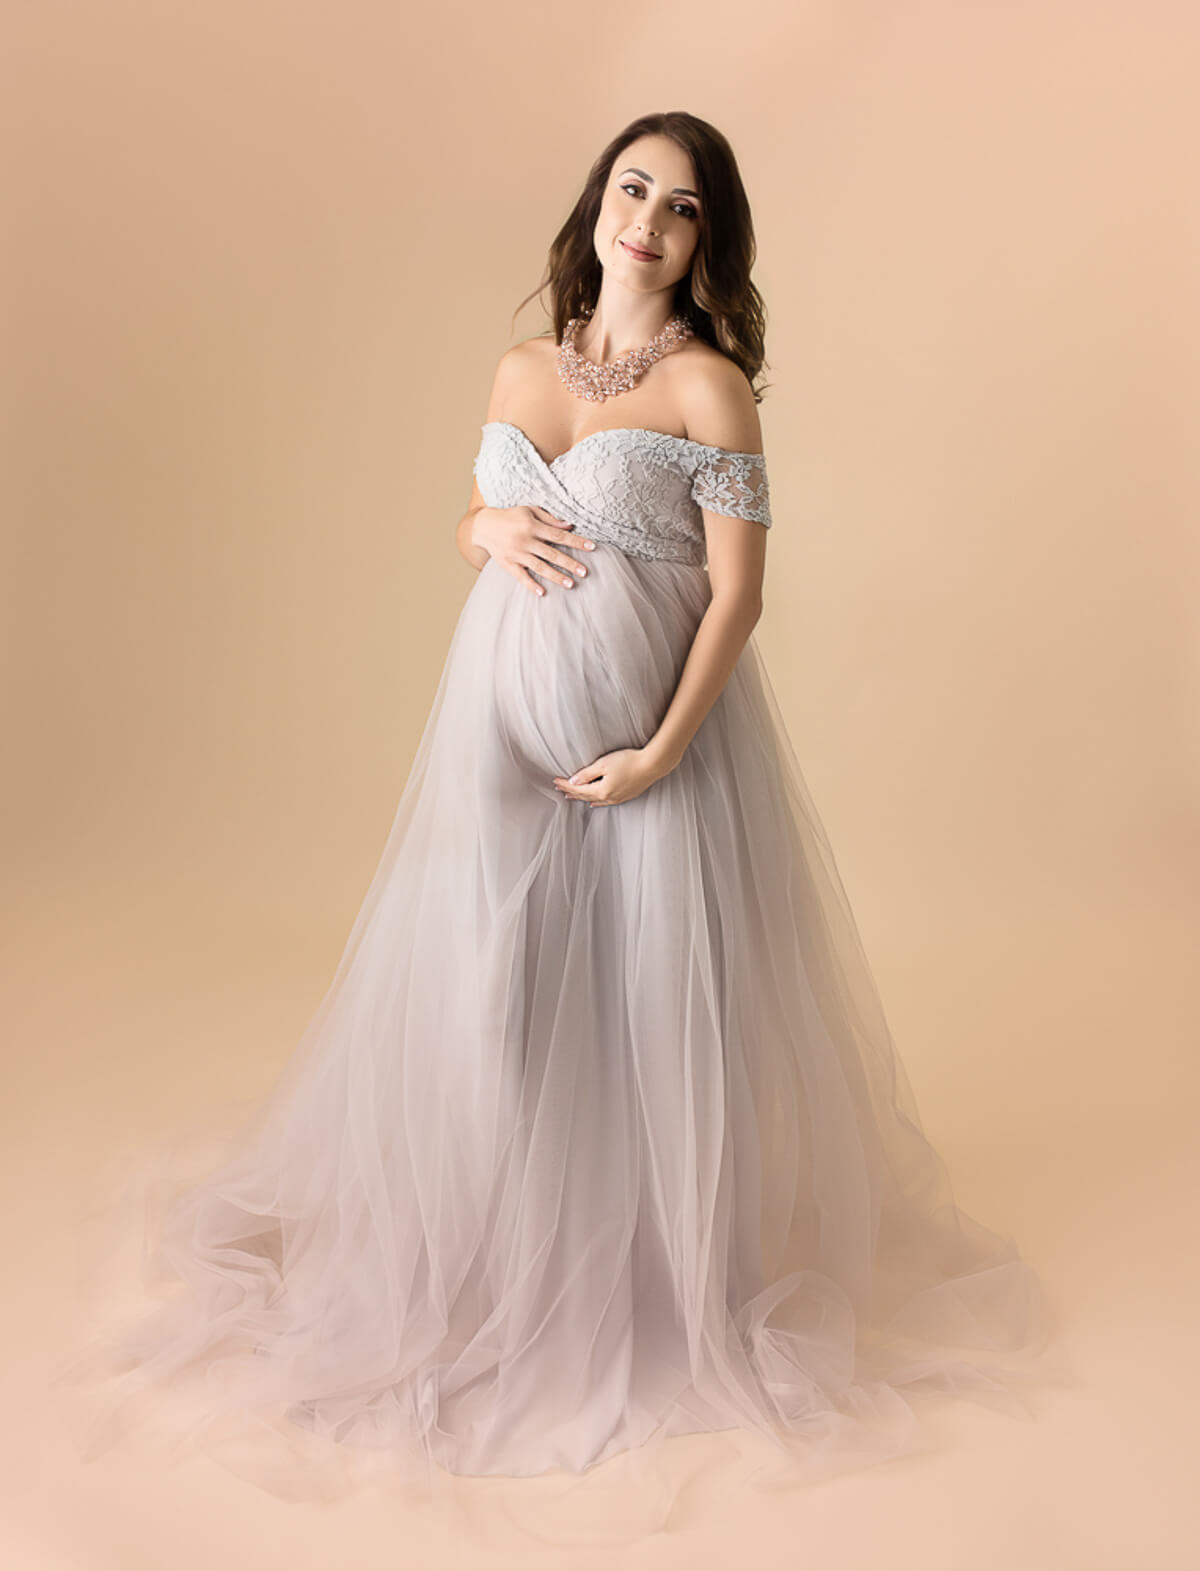 Pregnant woman in a long gown holding her bum in a maternity photo